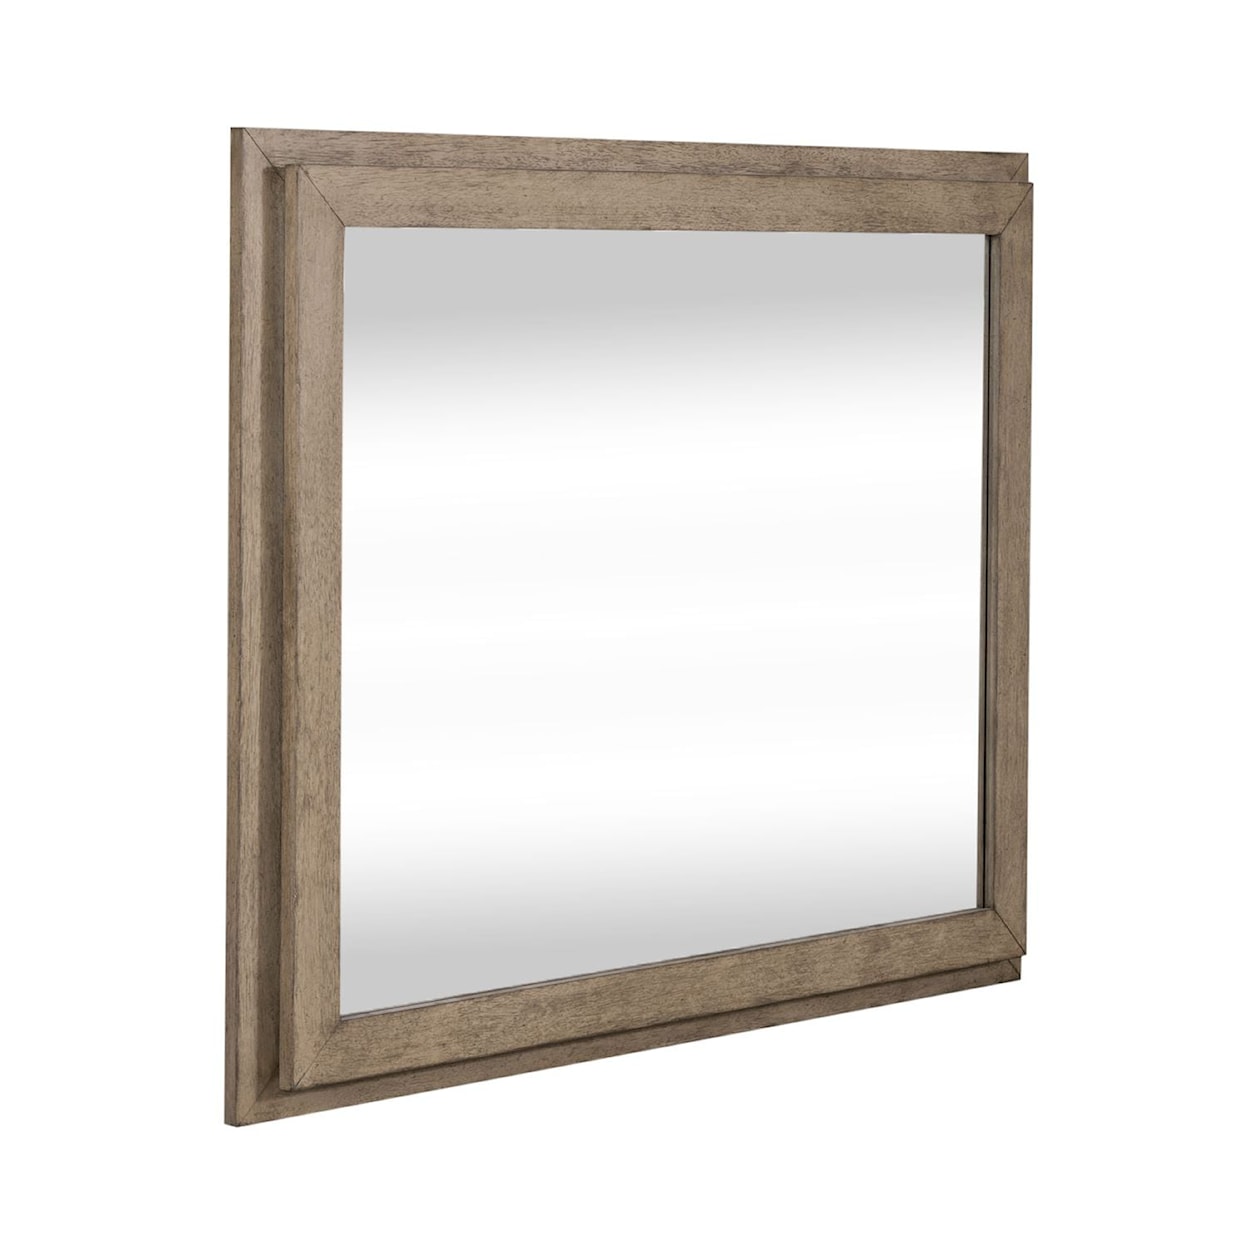 Libby Canyon Road Lighted Mirror